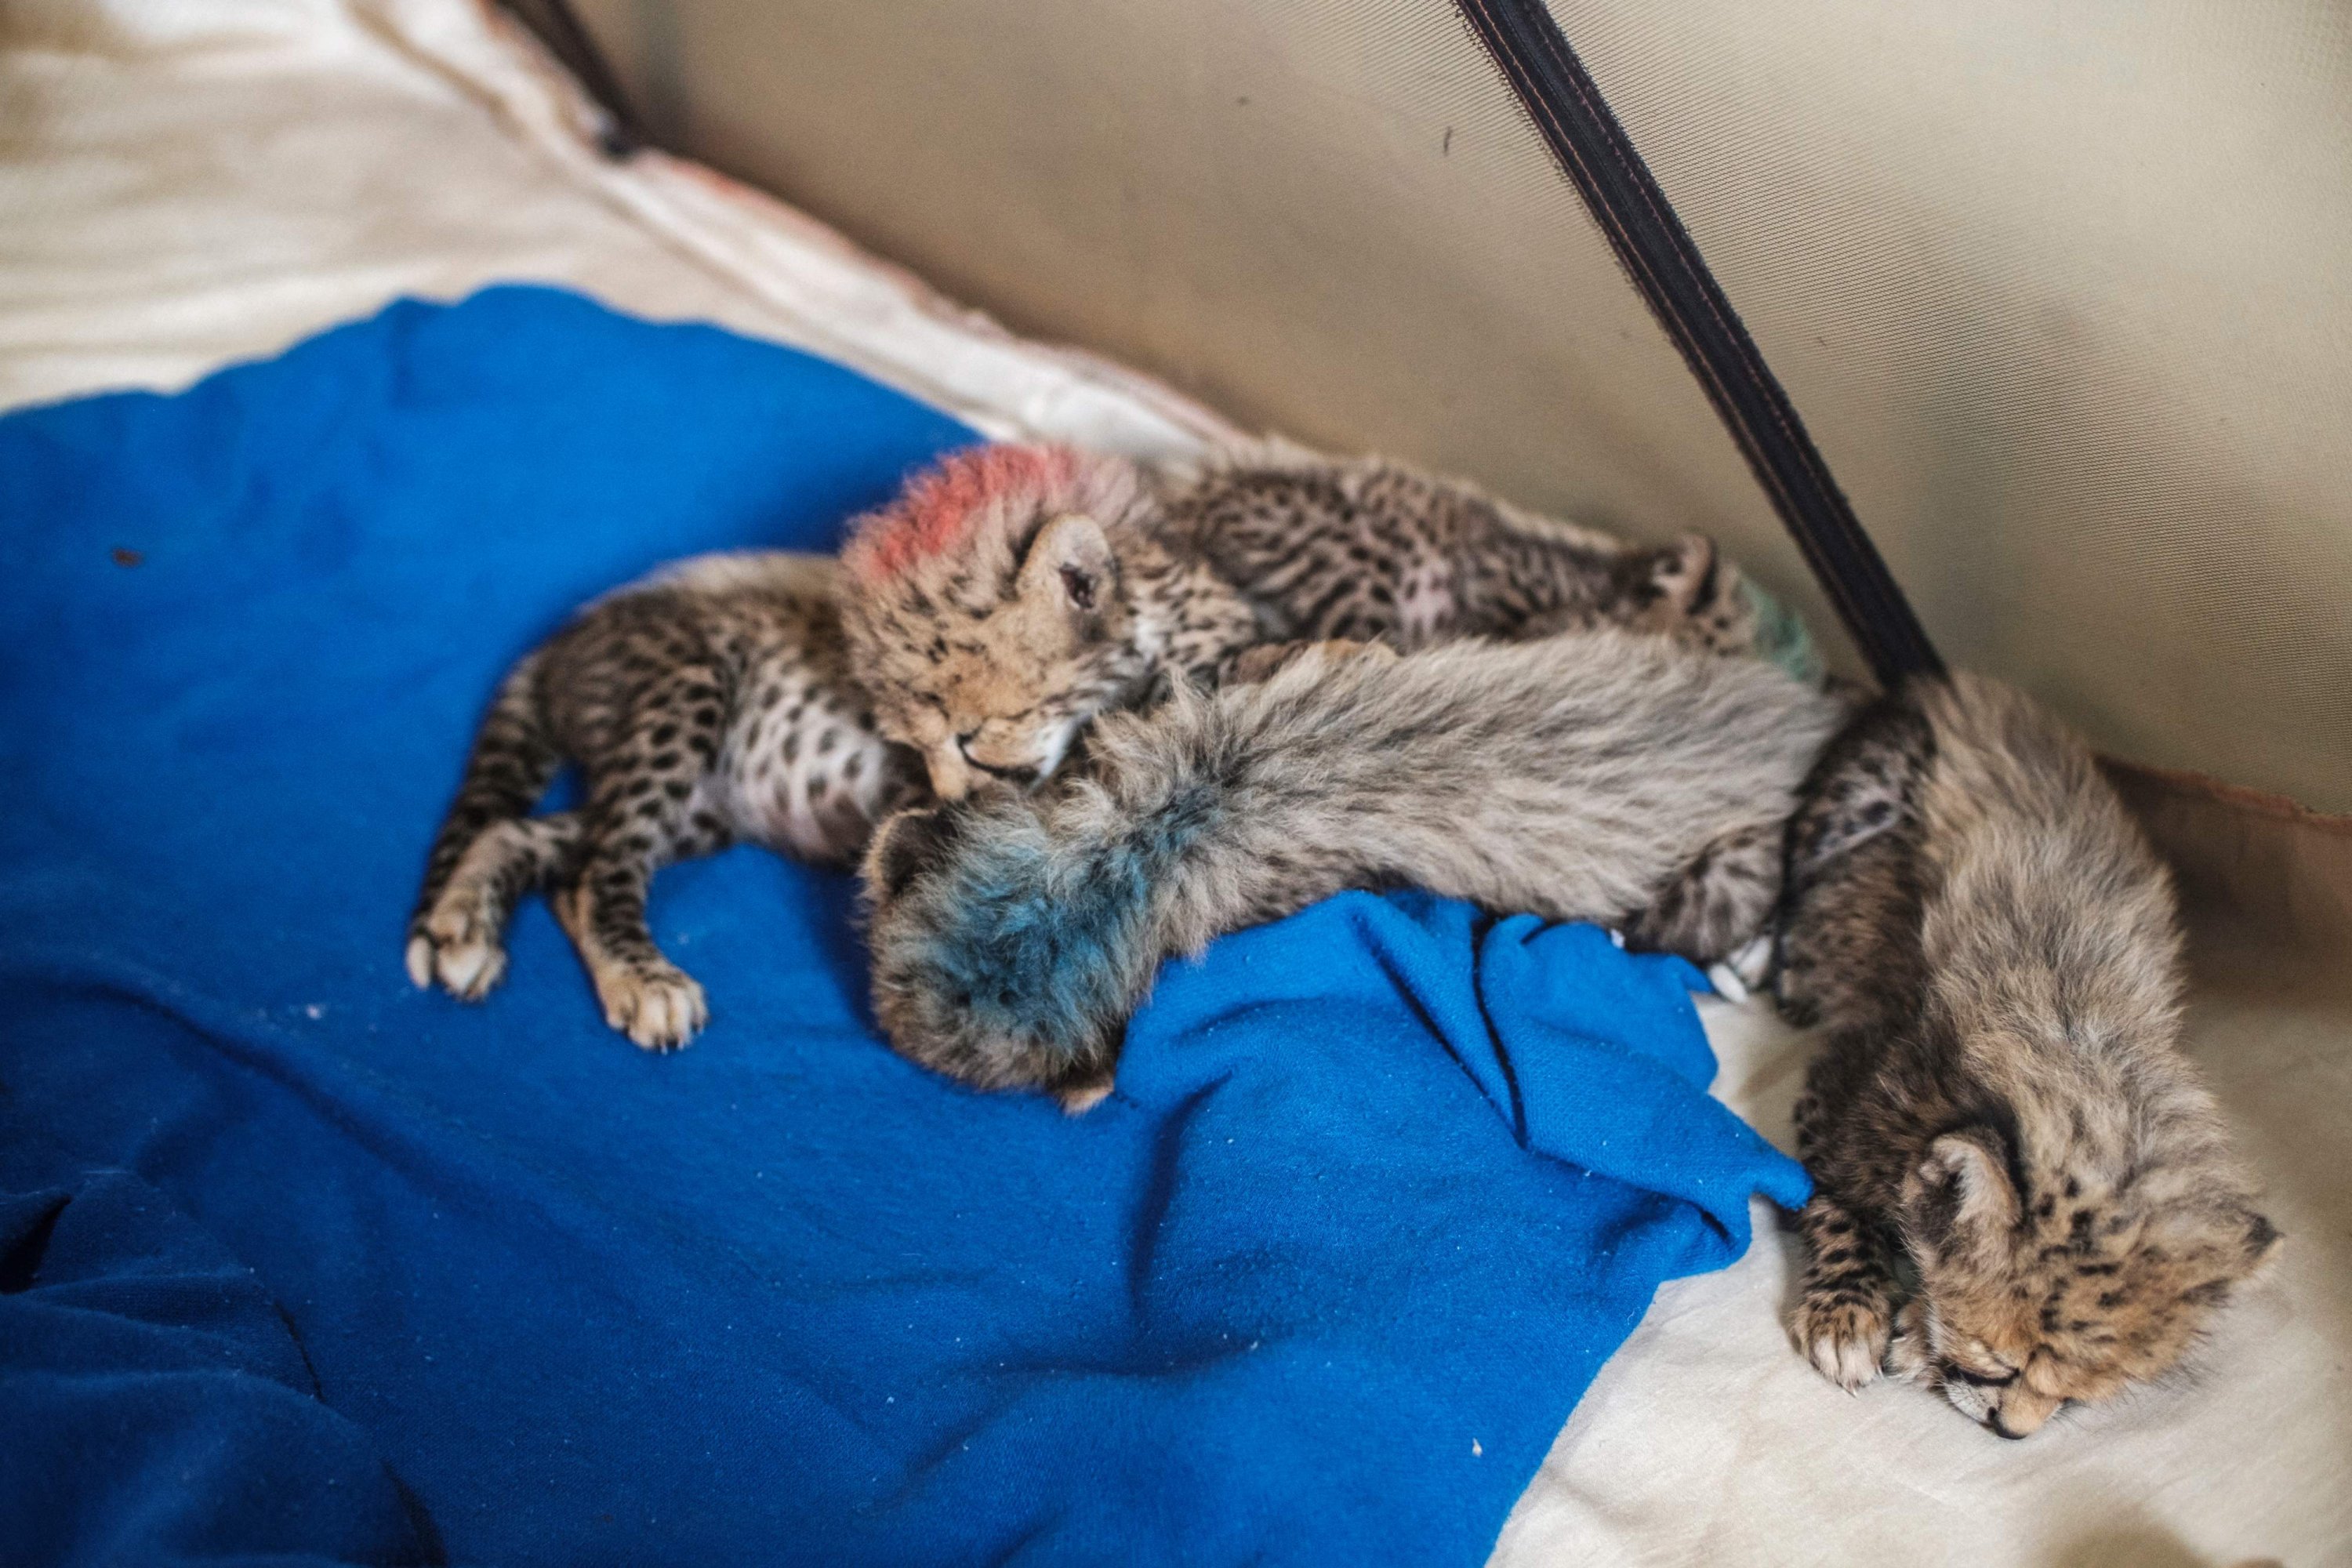 Baby cheetahs sleep in one of the facilities of the Cheetah Conservation Fund, in the city of Hargeisa, Somaliland, on Sep. 17, 2021. (AFP Photo) 